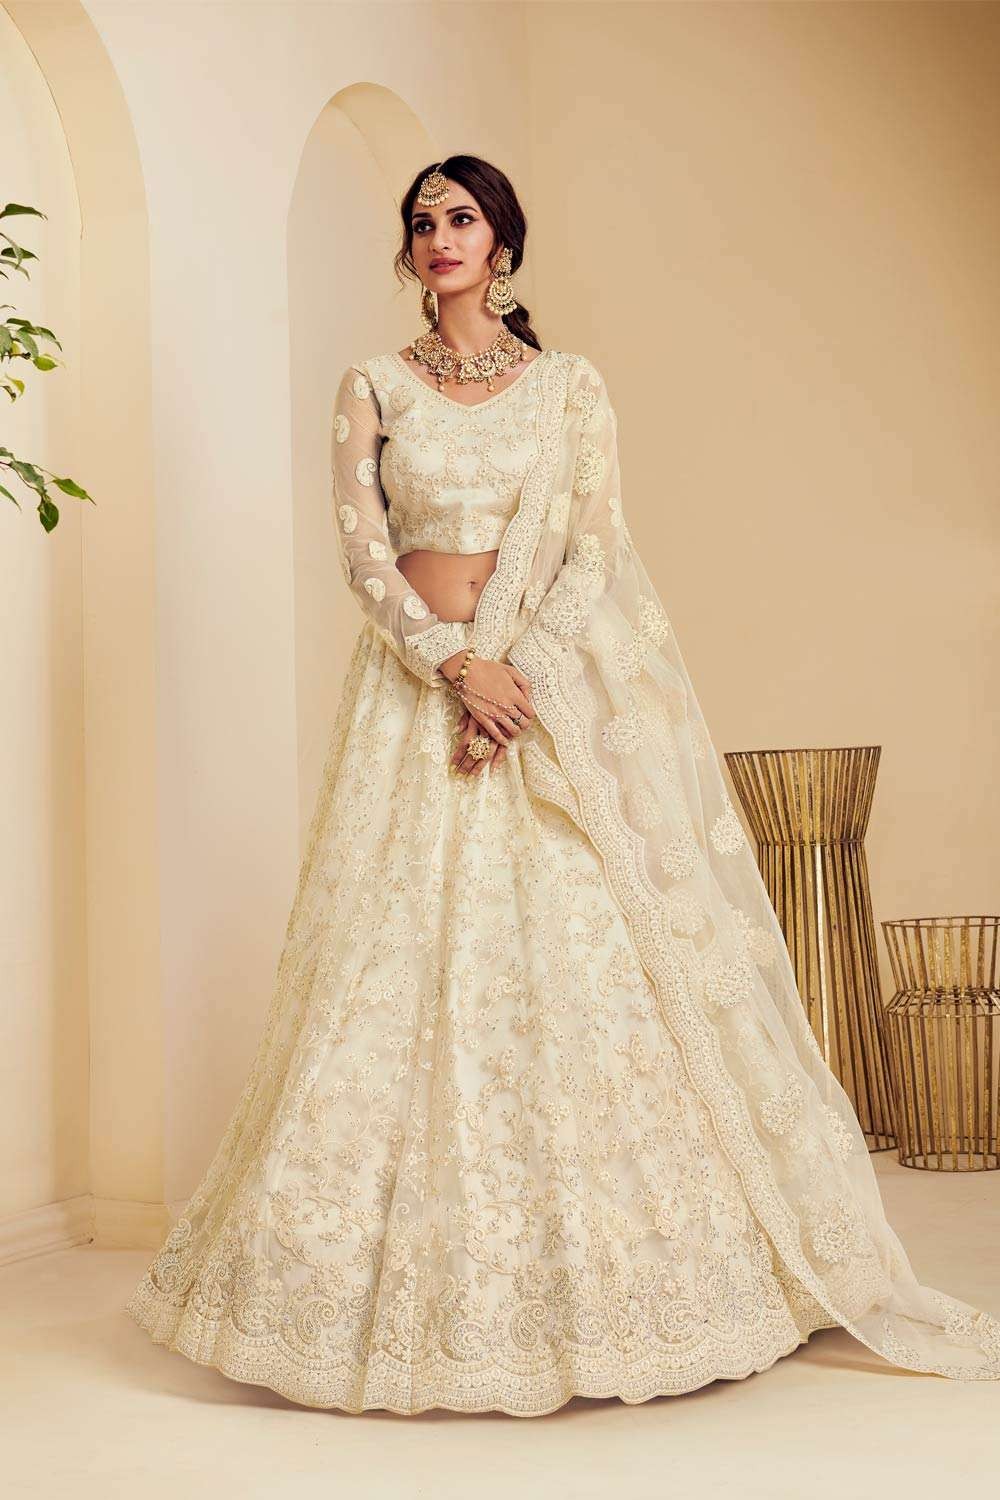 Photo of Bride in a white and golden lehenga